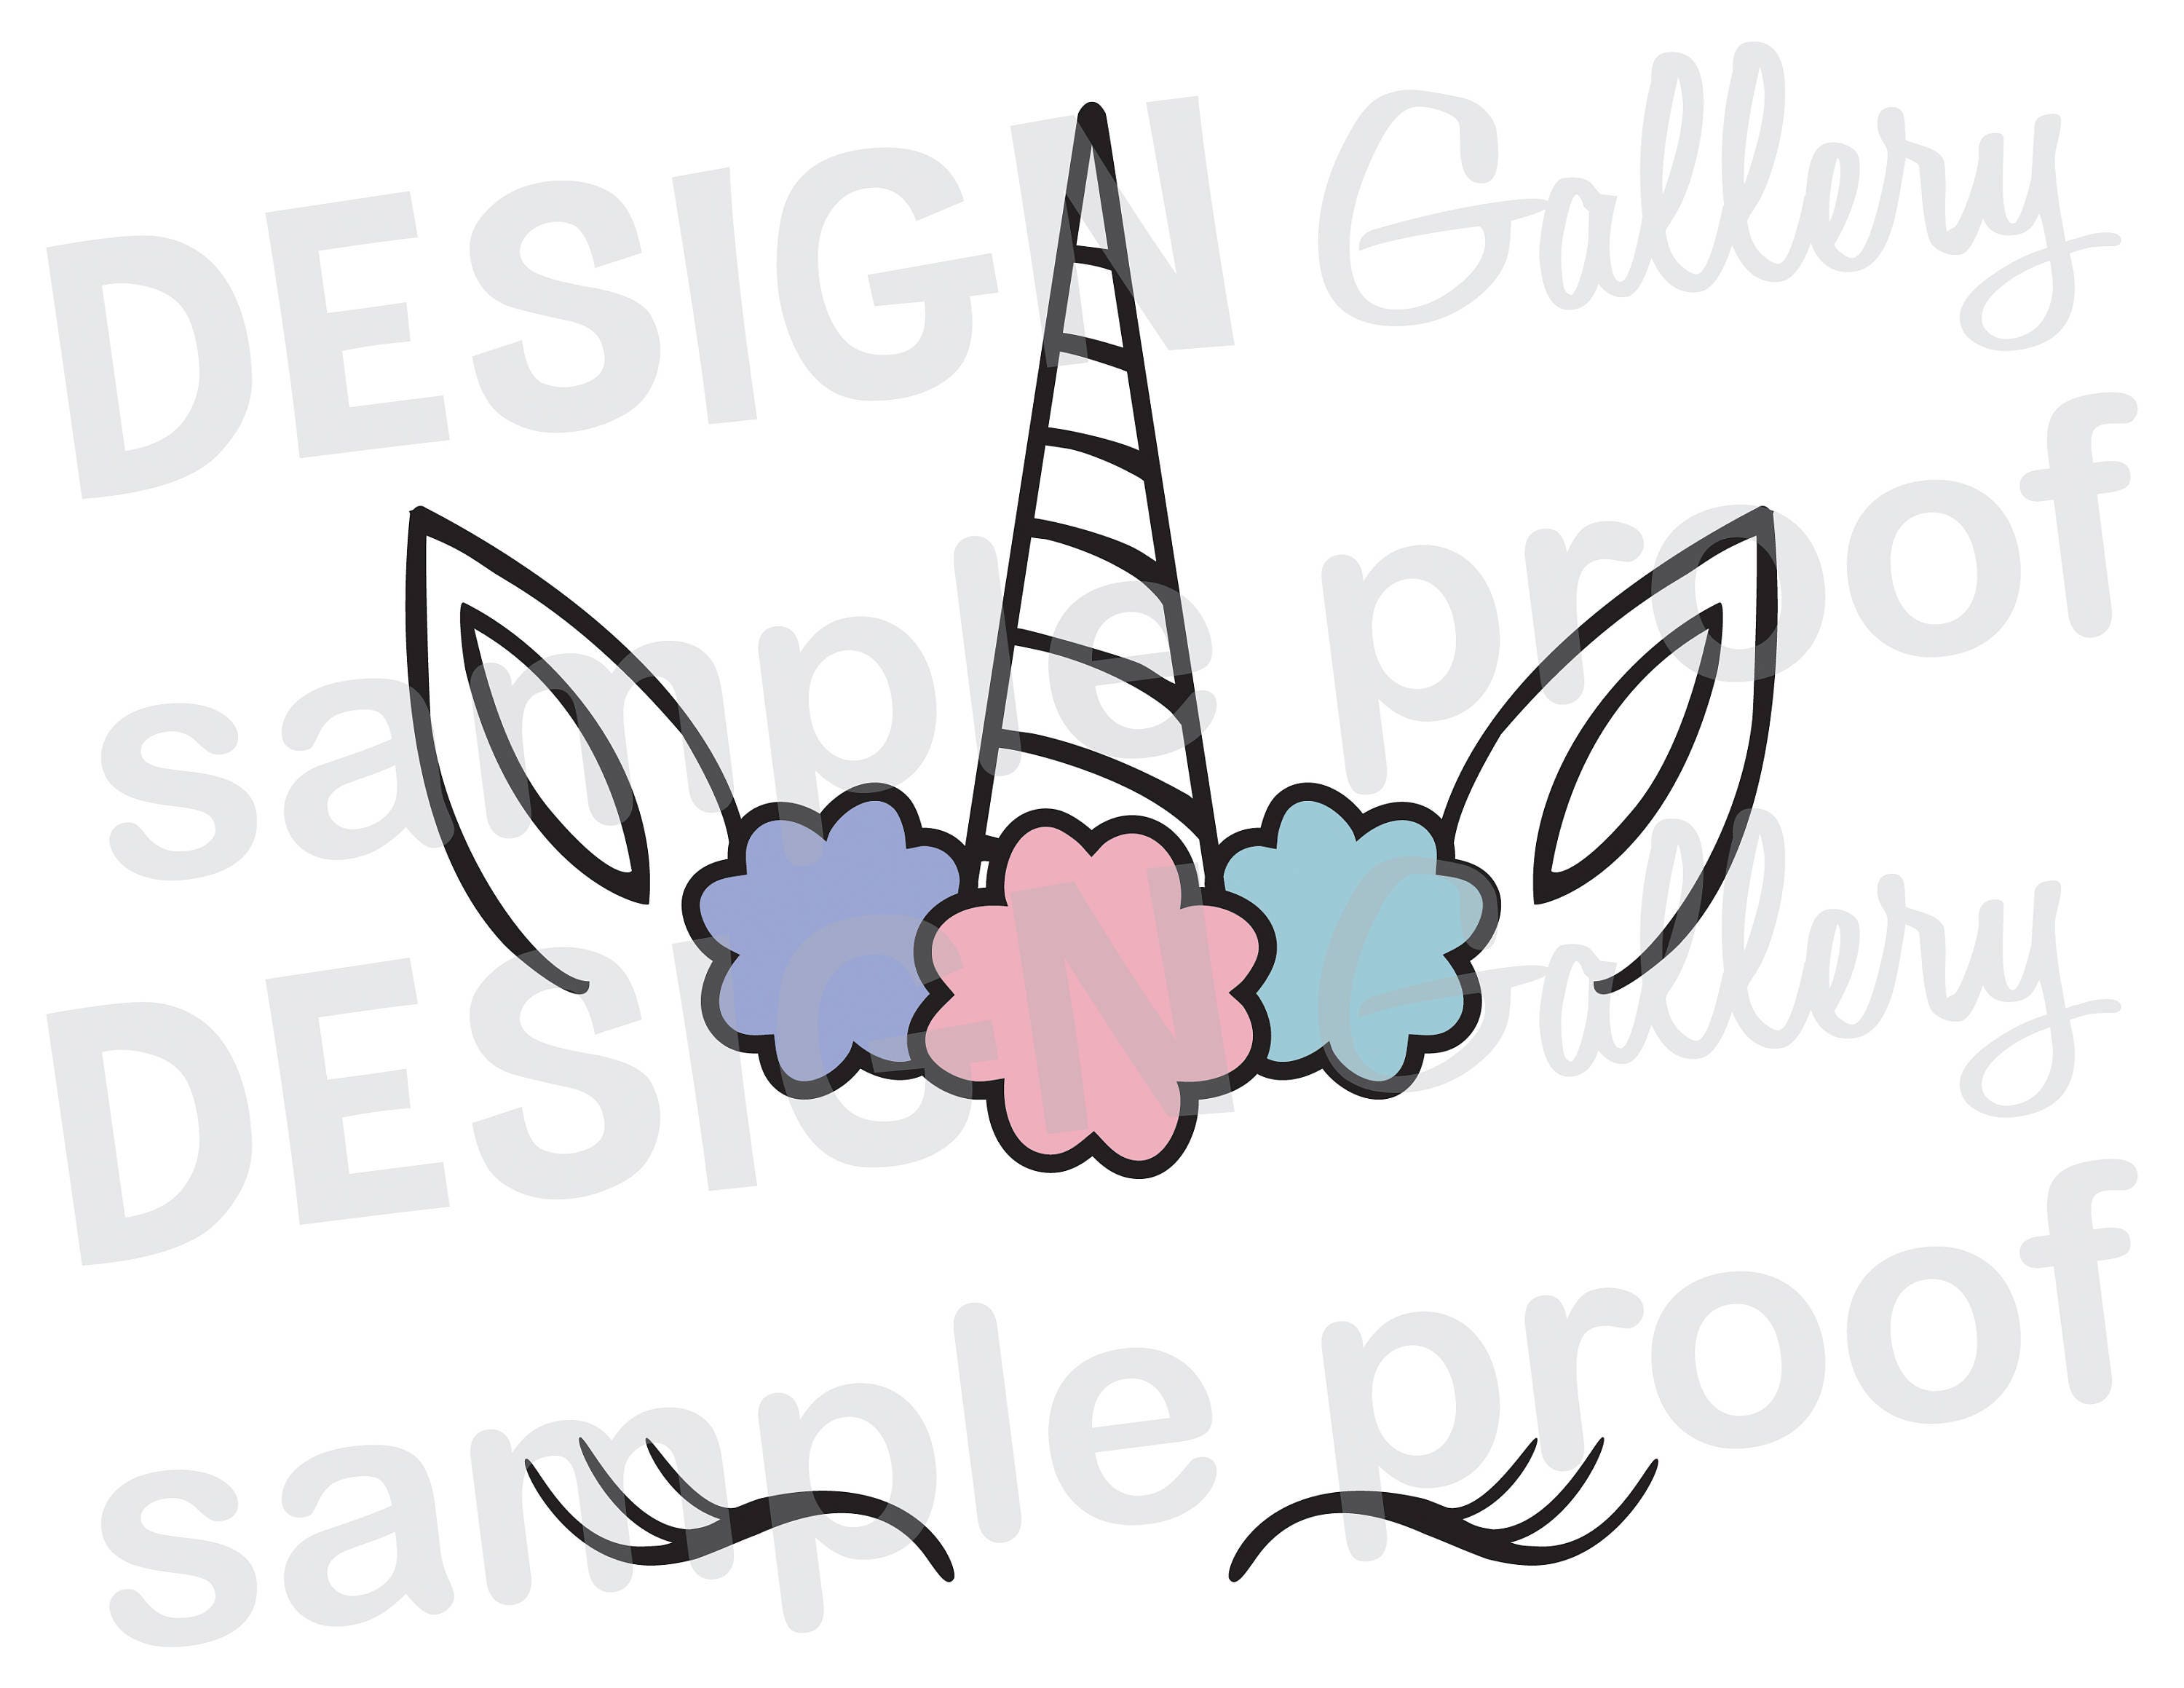 Unicorn Face - JPG, png & SVG, DXF cut file, Printable Digital, flowers, lashes - Instant ...